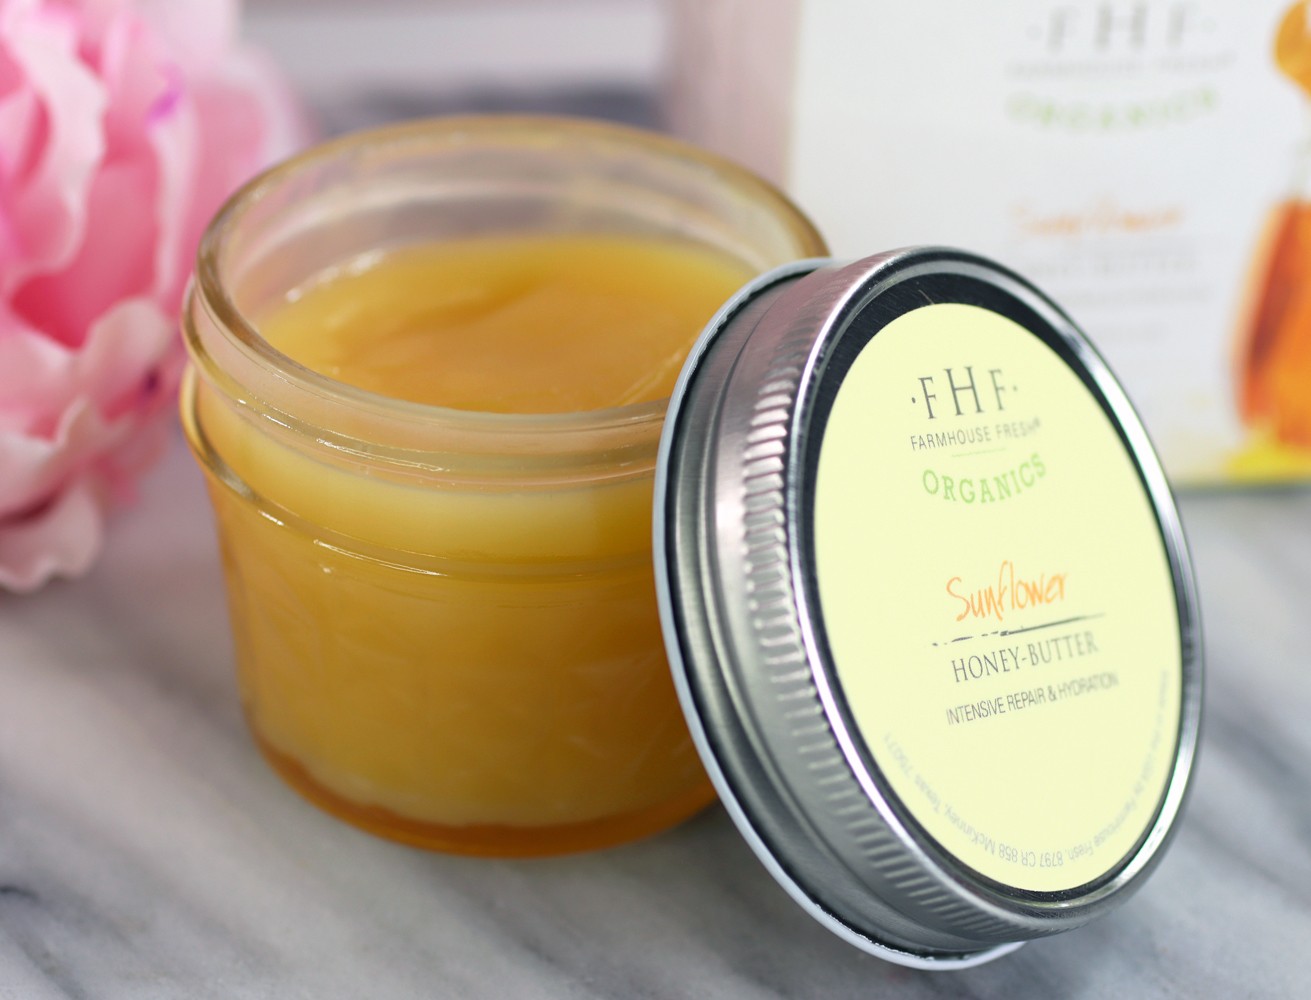 Farmhouse Fresh Sunflower Honey Butter for Dry Skin - The Best Cruelty Free Hand Creams and Scrubs for Dry Winter Skin by LA cruelty free beauty blogger My Beauty Bunny